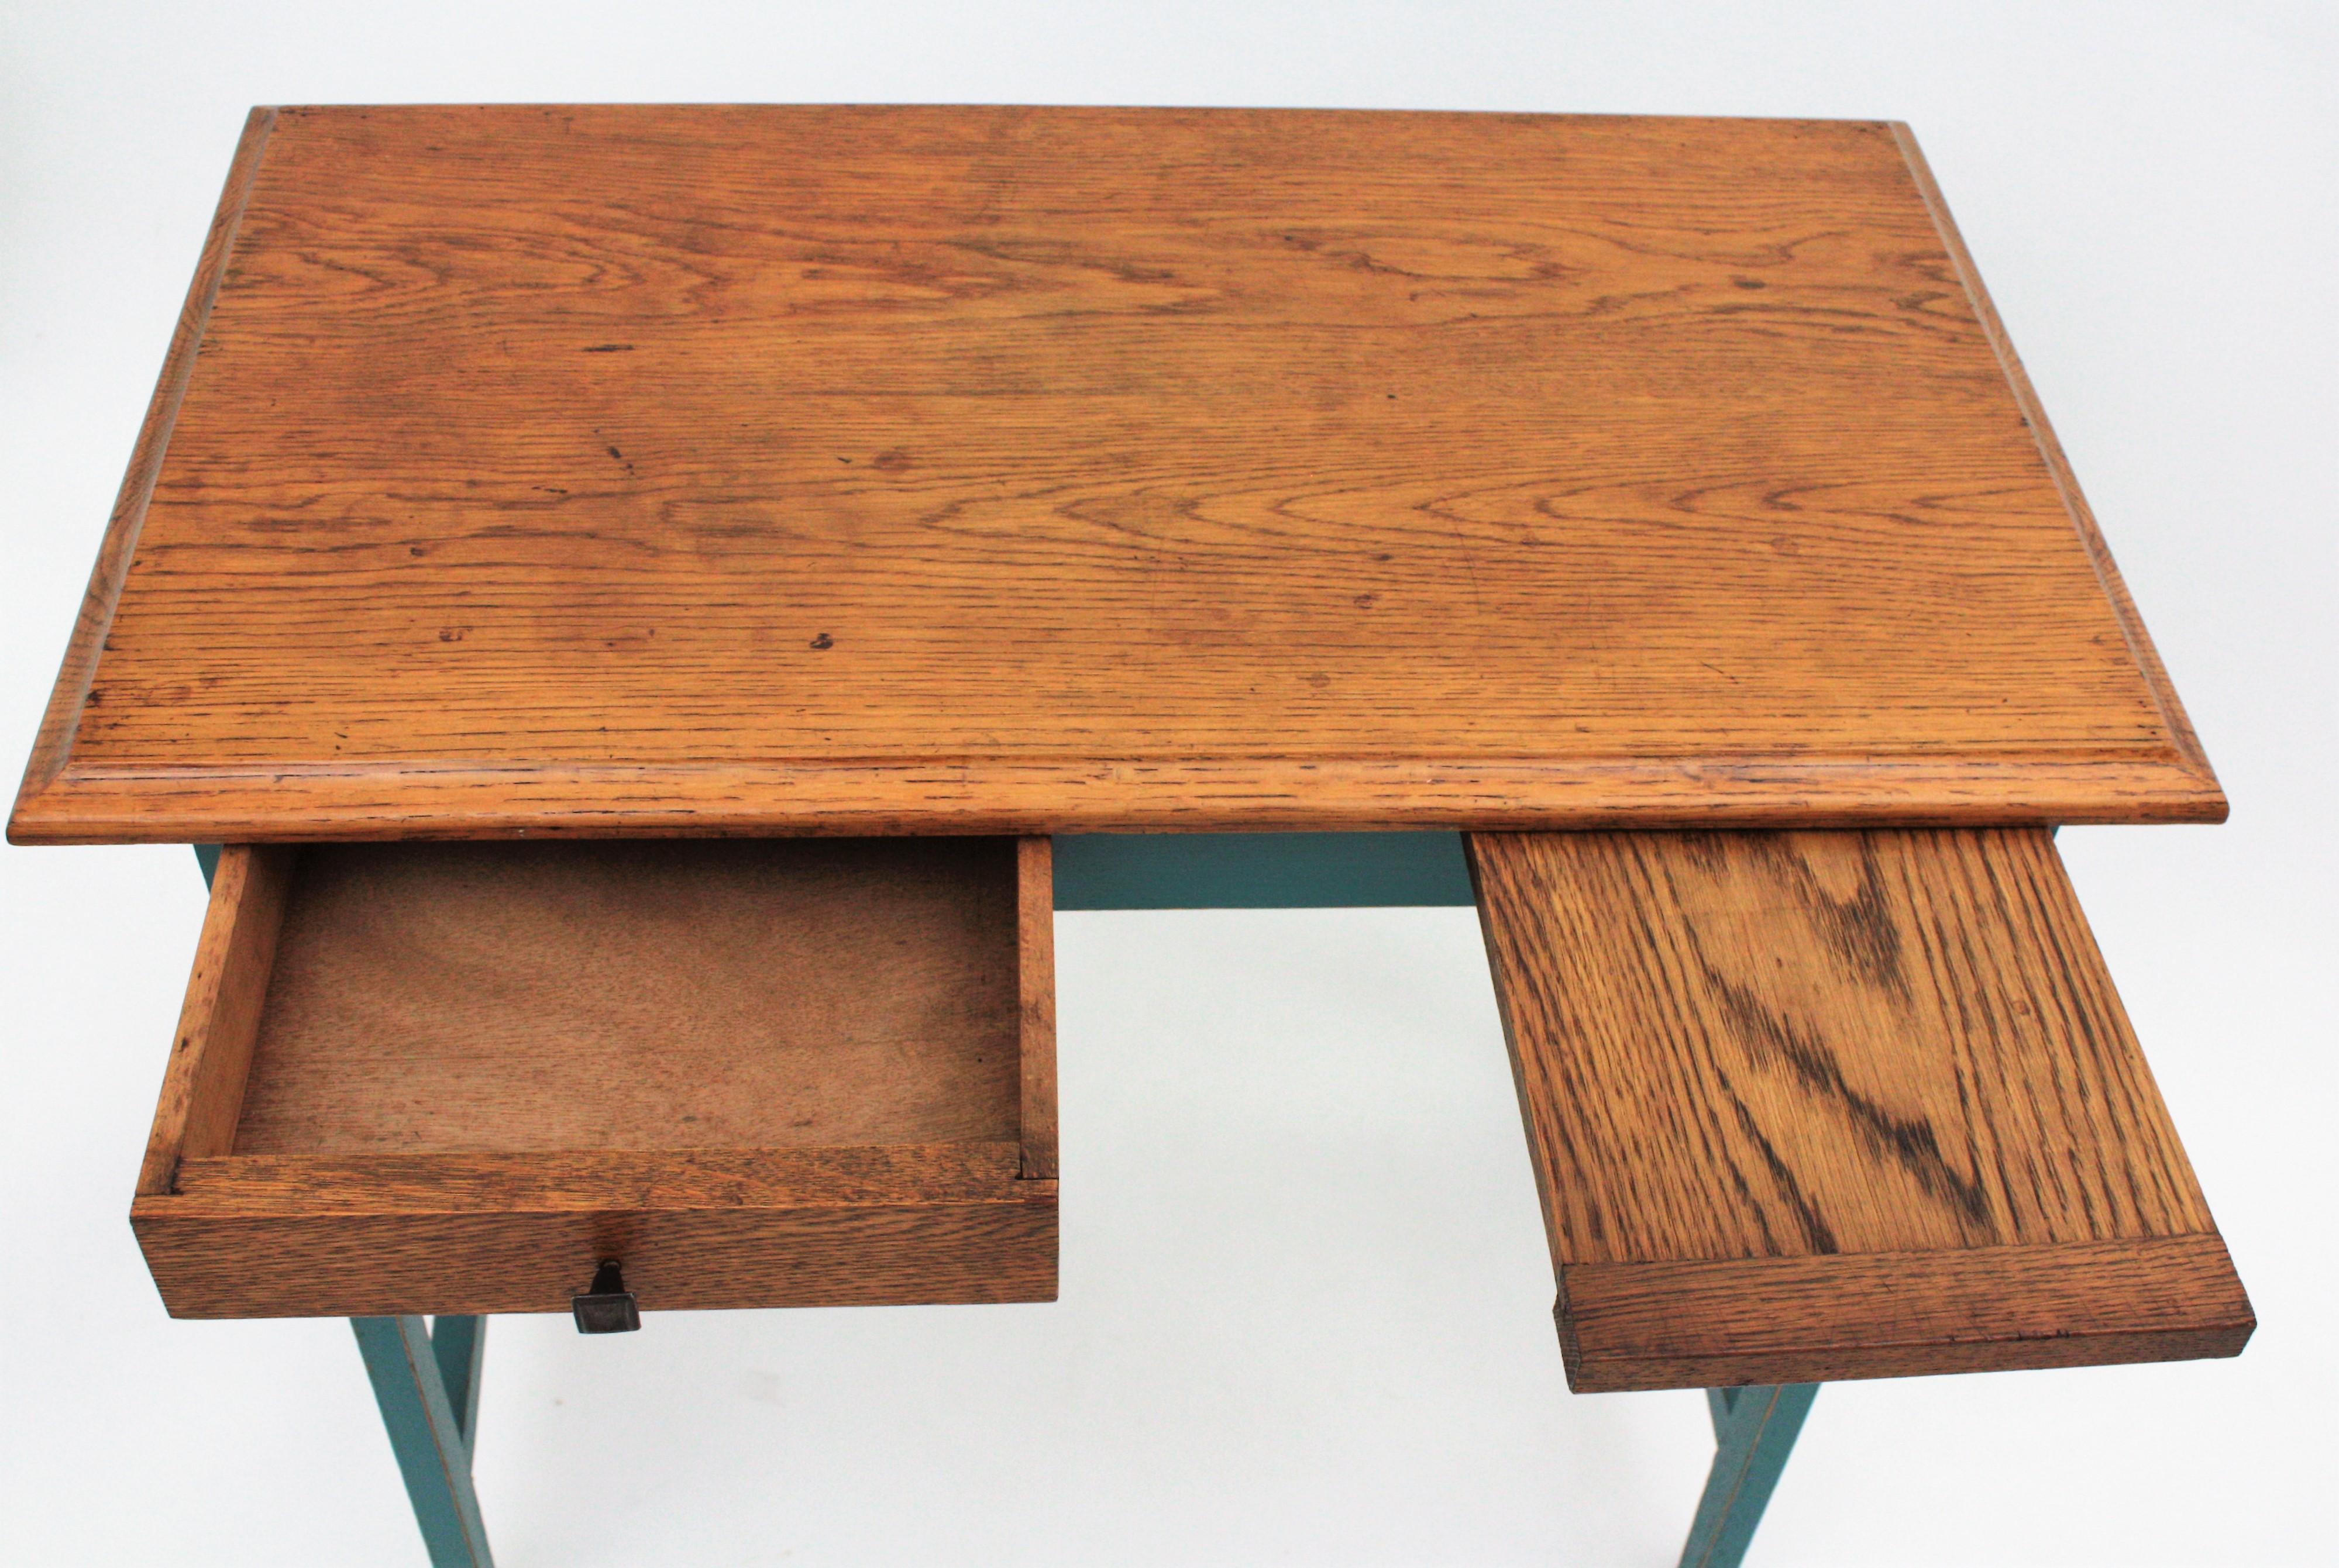 Spanish Desk and Stool in Oak with Green Blue Patina, 1930s For Sale 8